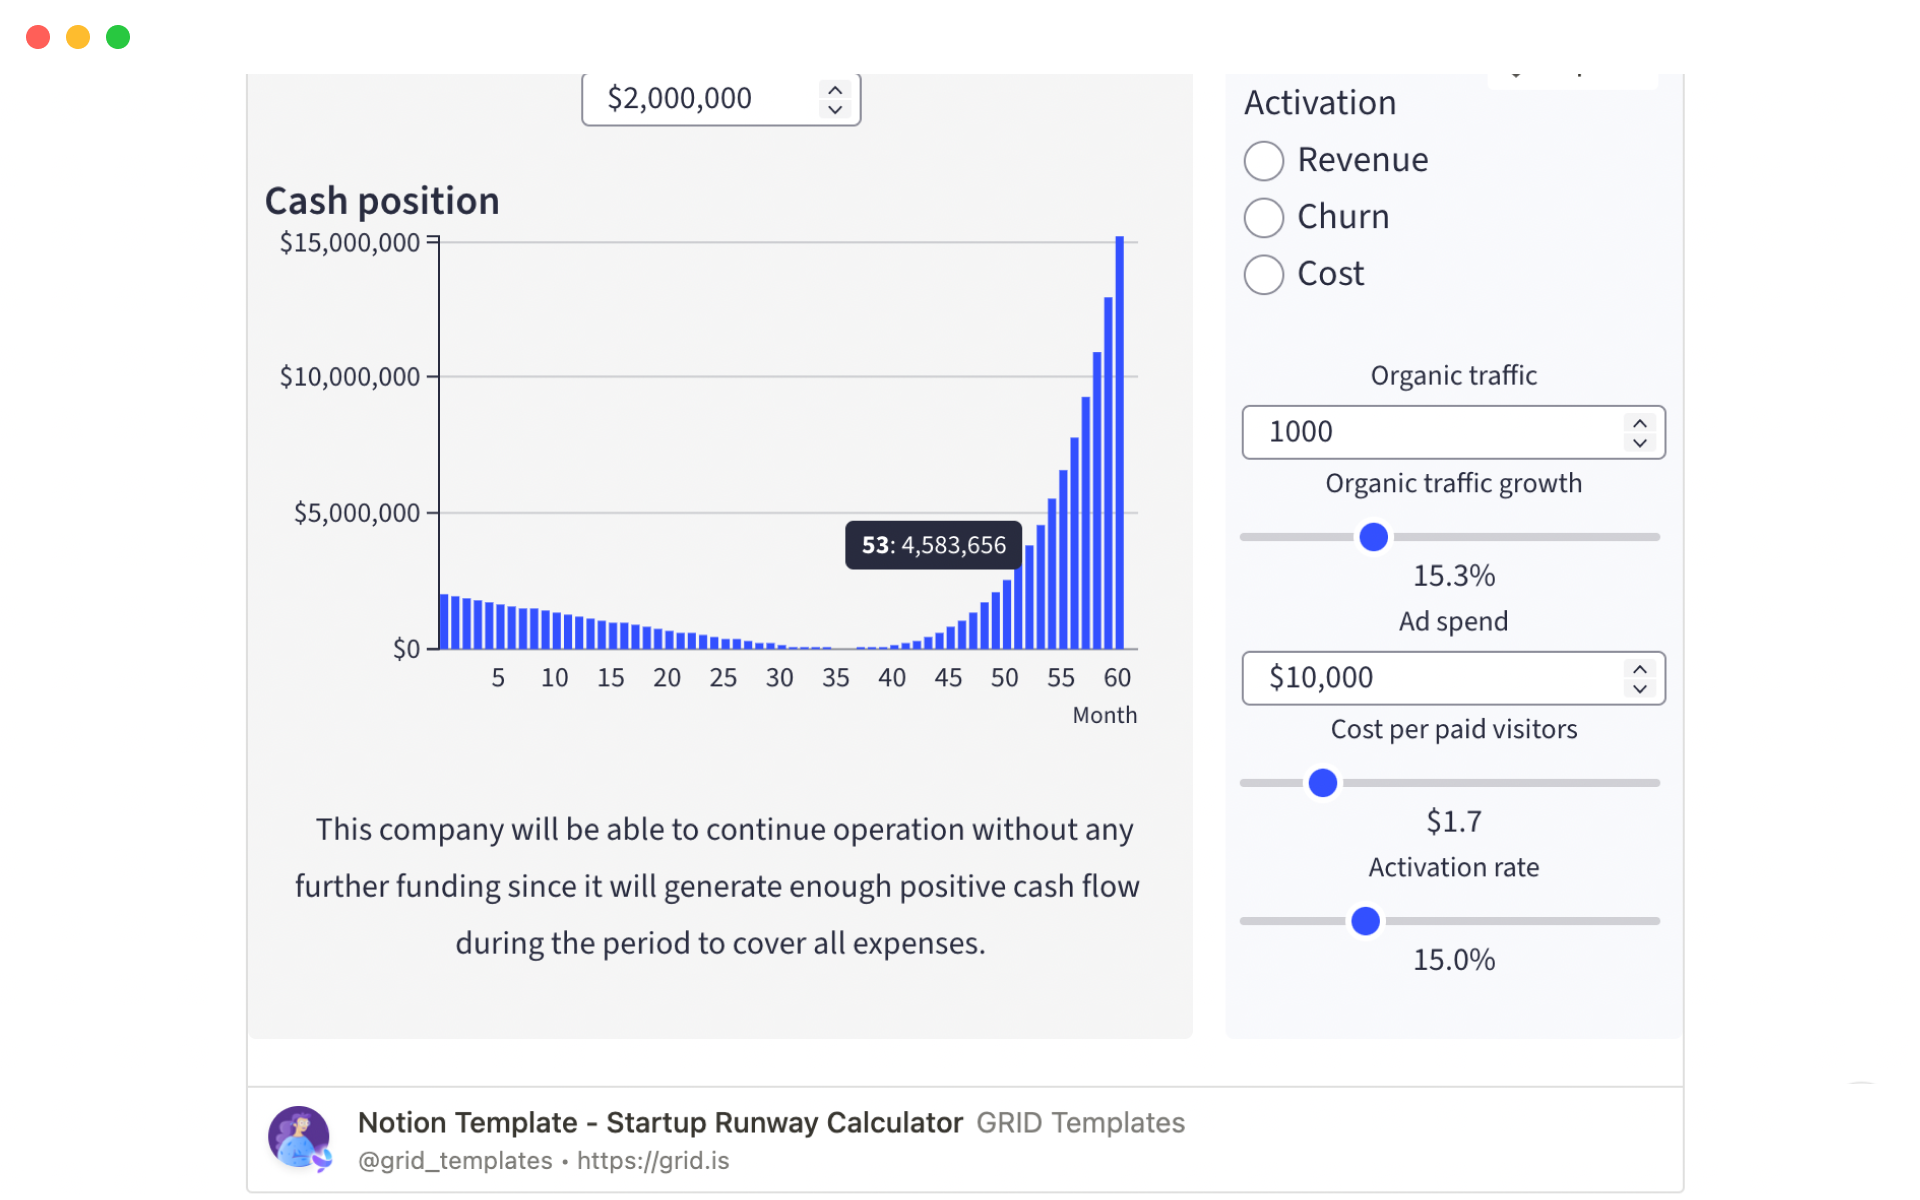 Forecast, budget, strategize and seek funds using GRID’s integration in Notion.